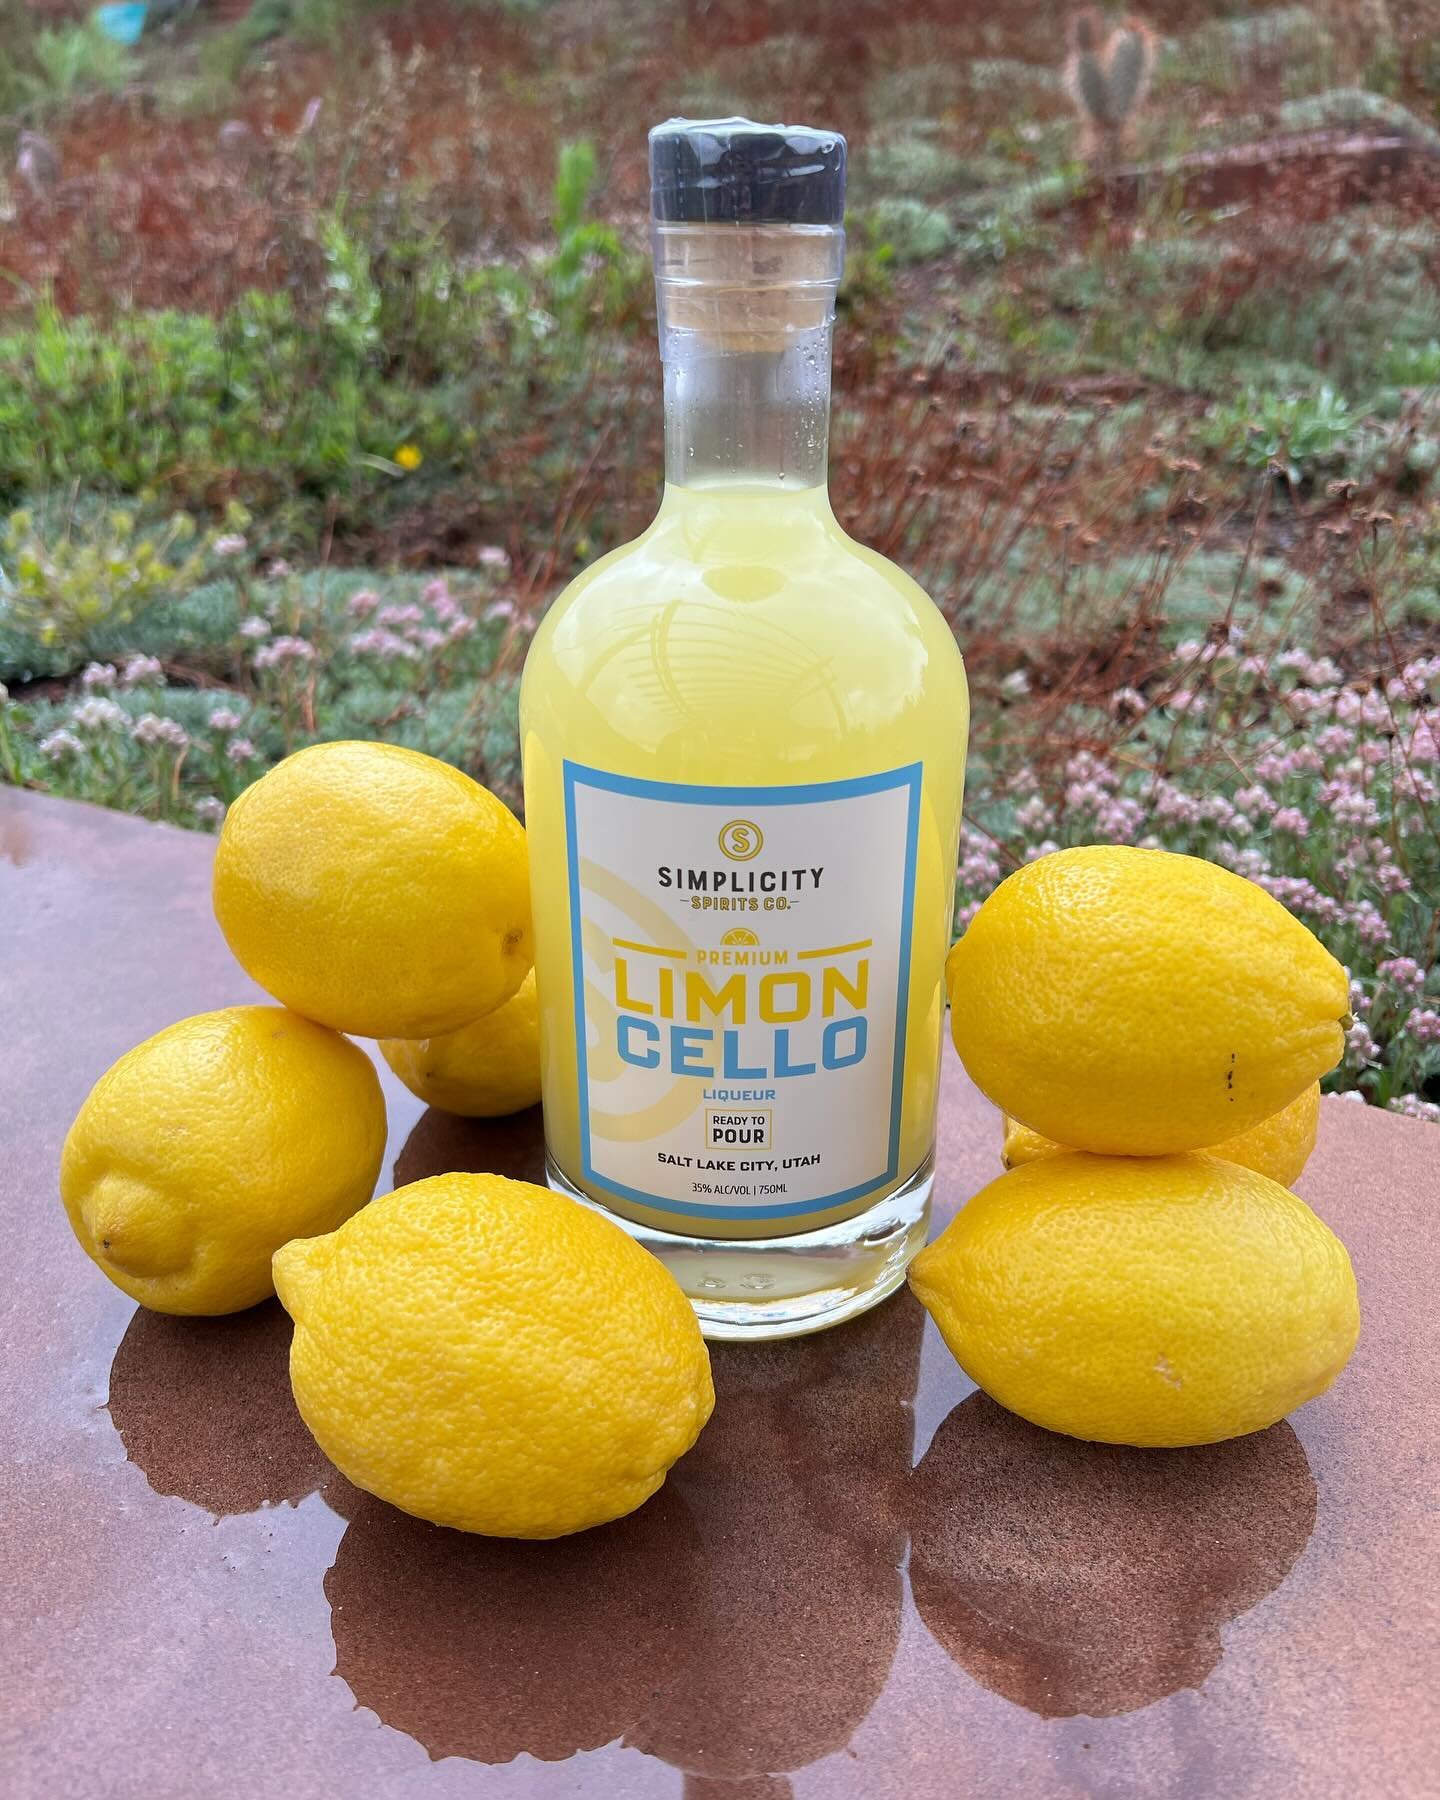 Guess what else is back in stock? Celebrate spring with a bottle of Simplicity Limoncello 🍋